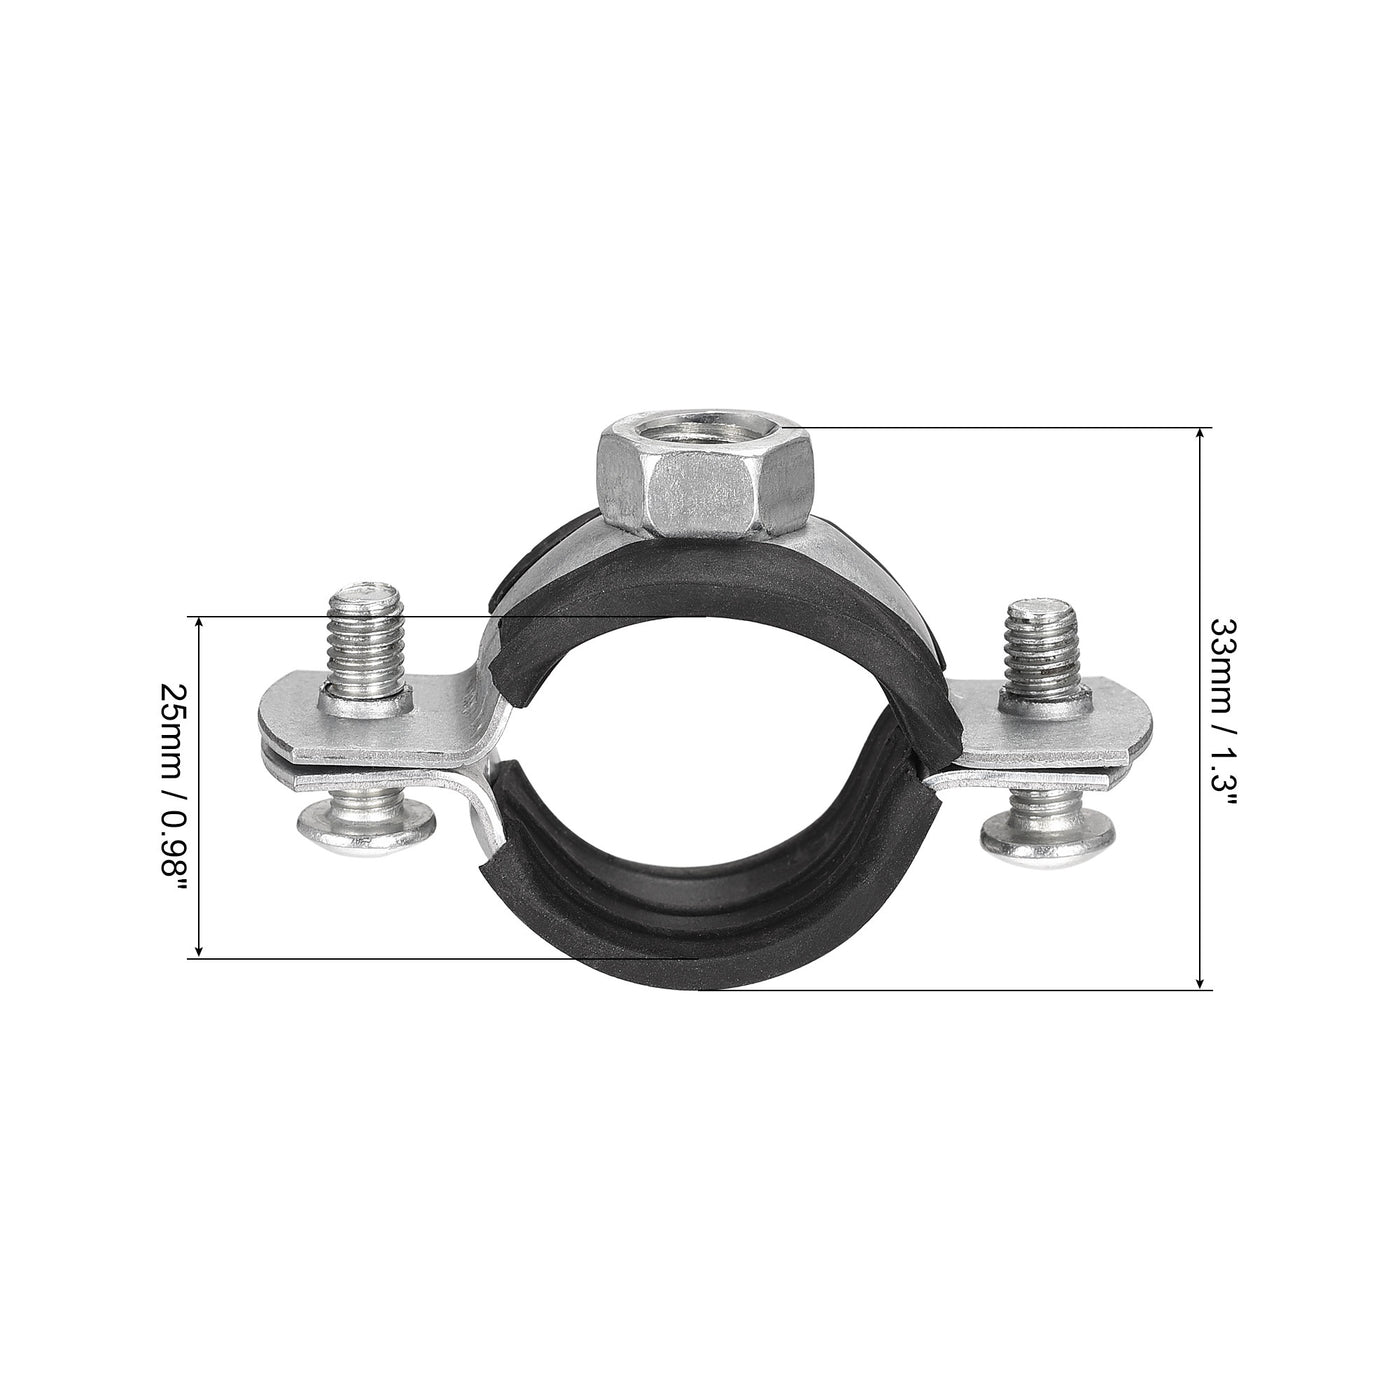 Uxcell Uxcell Adjustable Pipe Bracket Clamp, 2" (50mm) Wall Ceiling Mount Iron Pipe Strap Support 5pcs